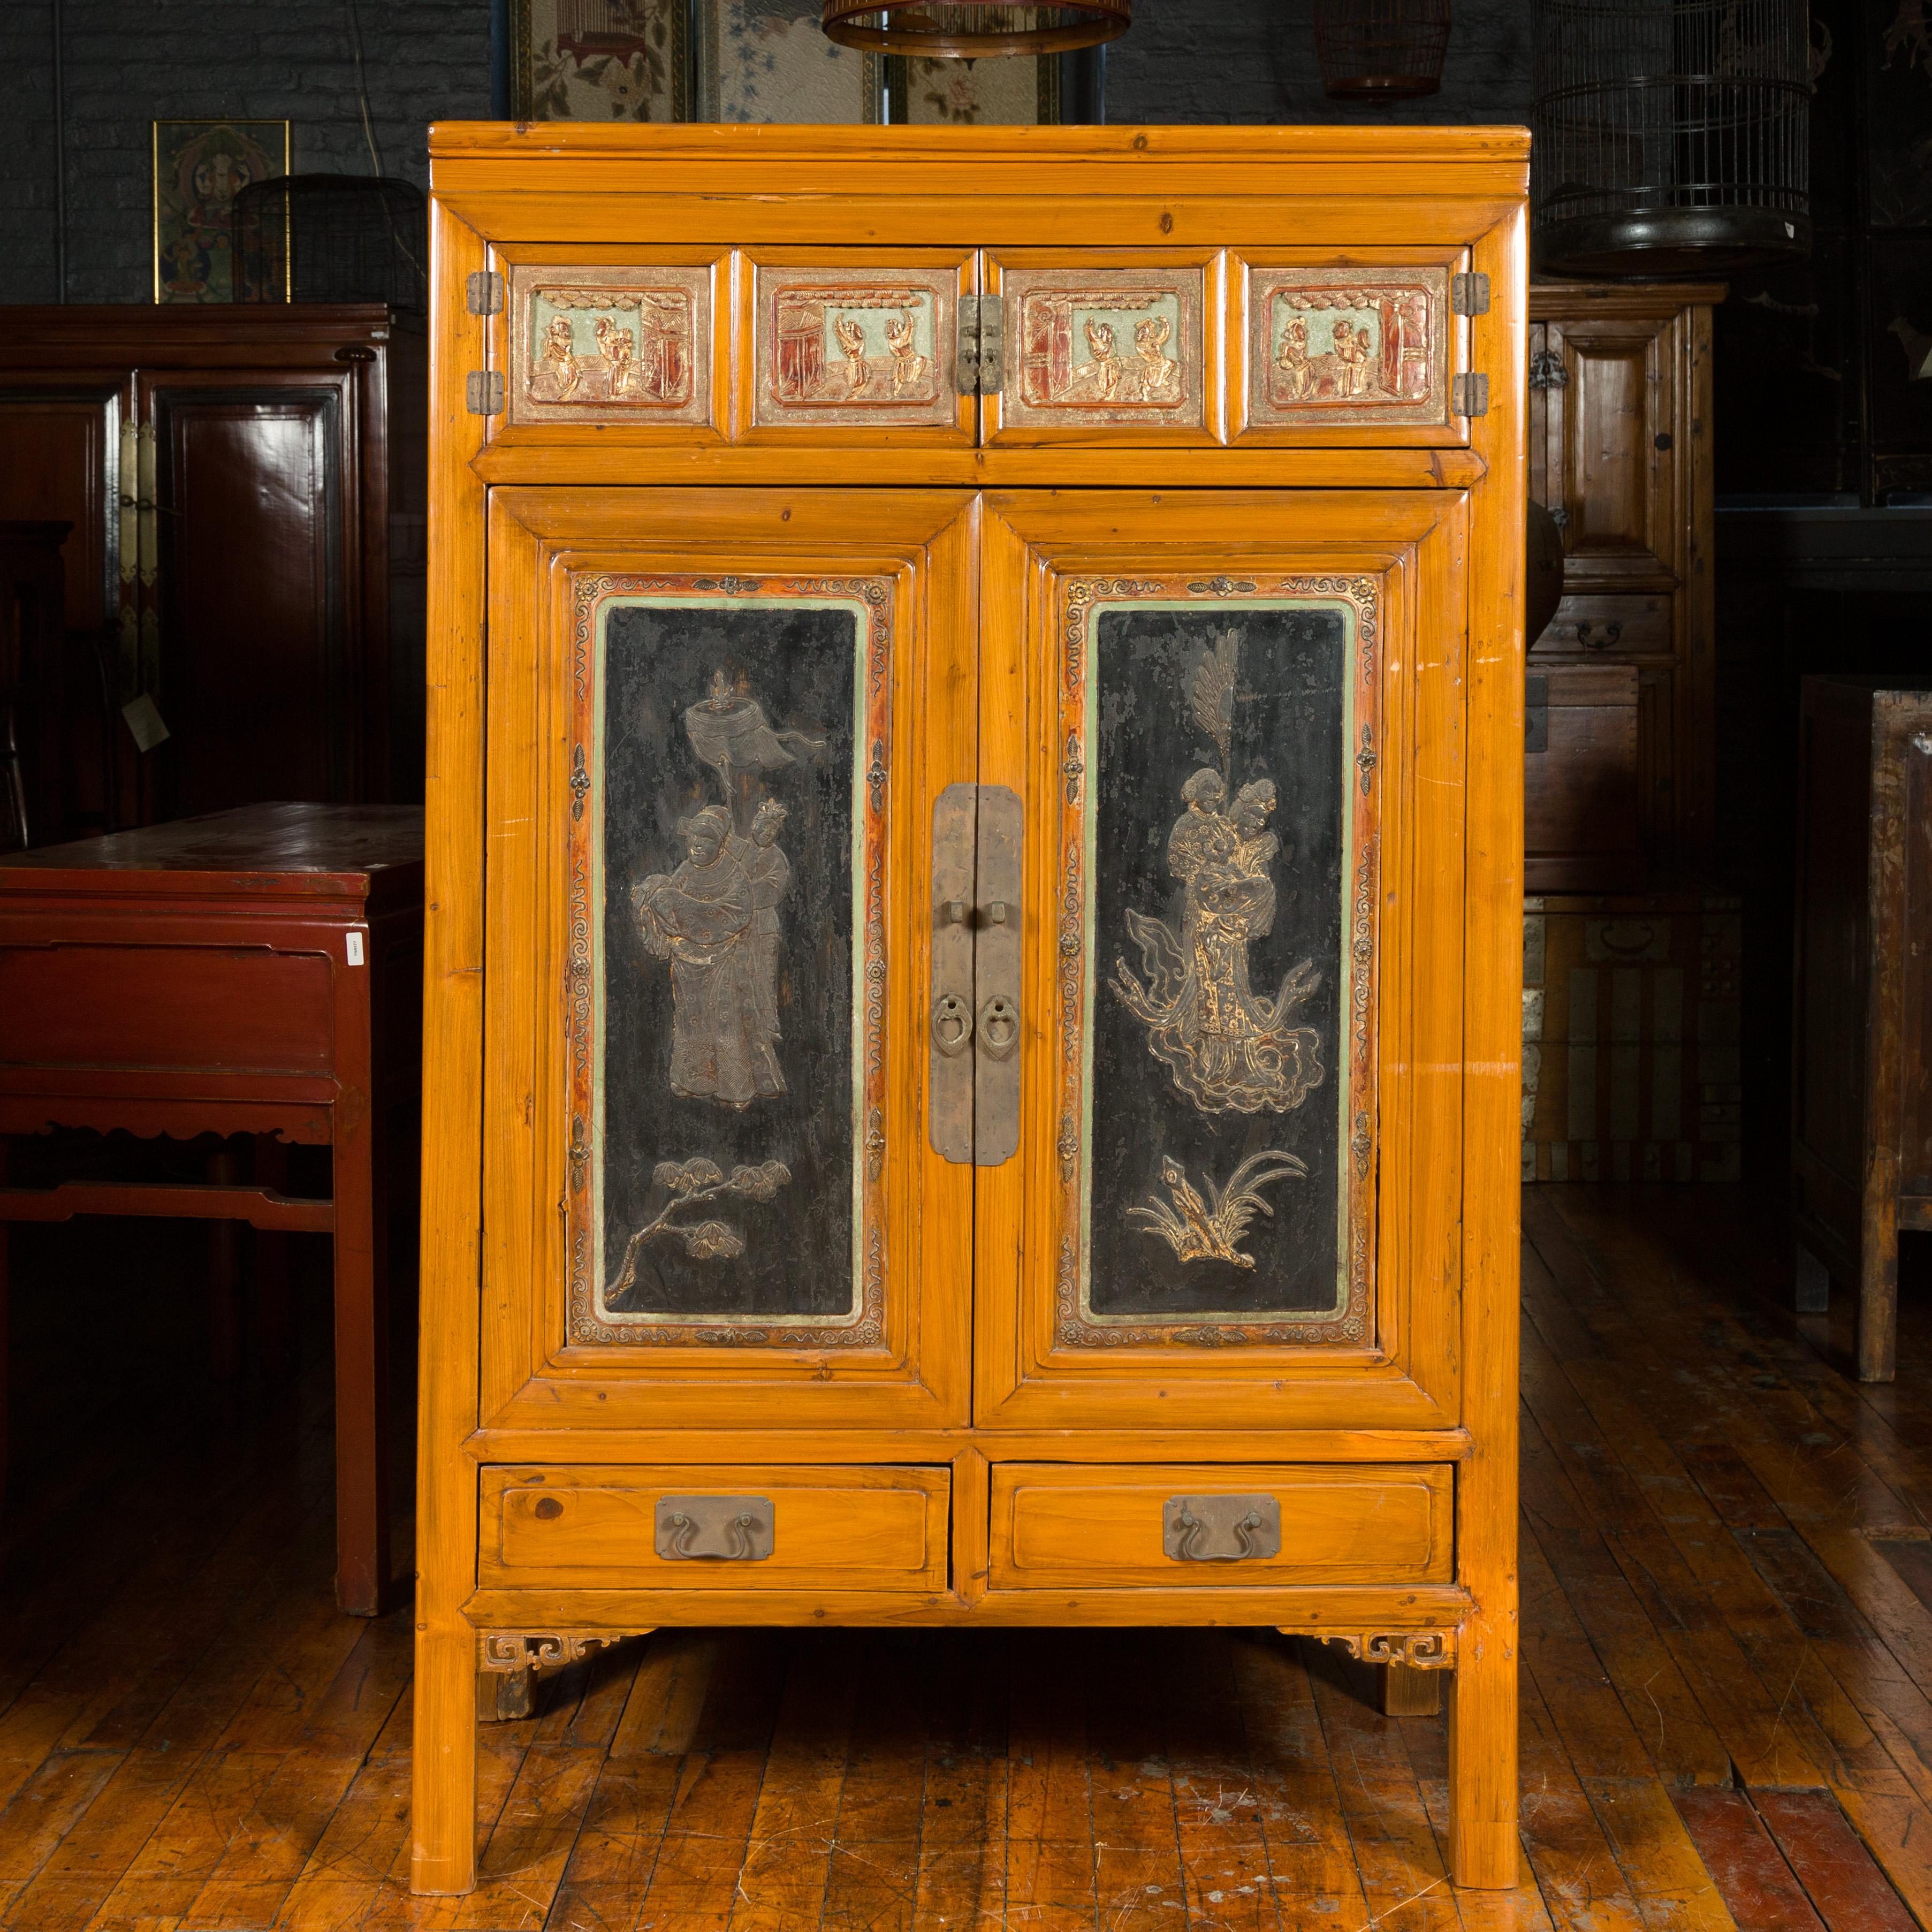 A Chinese Qing dynasty period cabinet from the 19th century, with carved panels depicting Guanyin and Daoist immortals. Created in China during the Qing dynasty, this 19th century cabinet attracts our attention with its beautifully contrasting